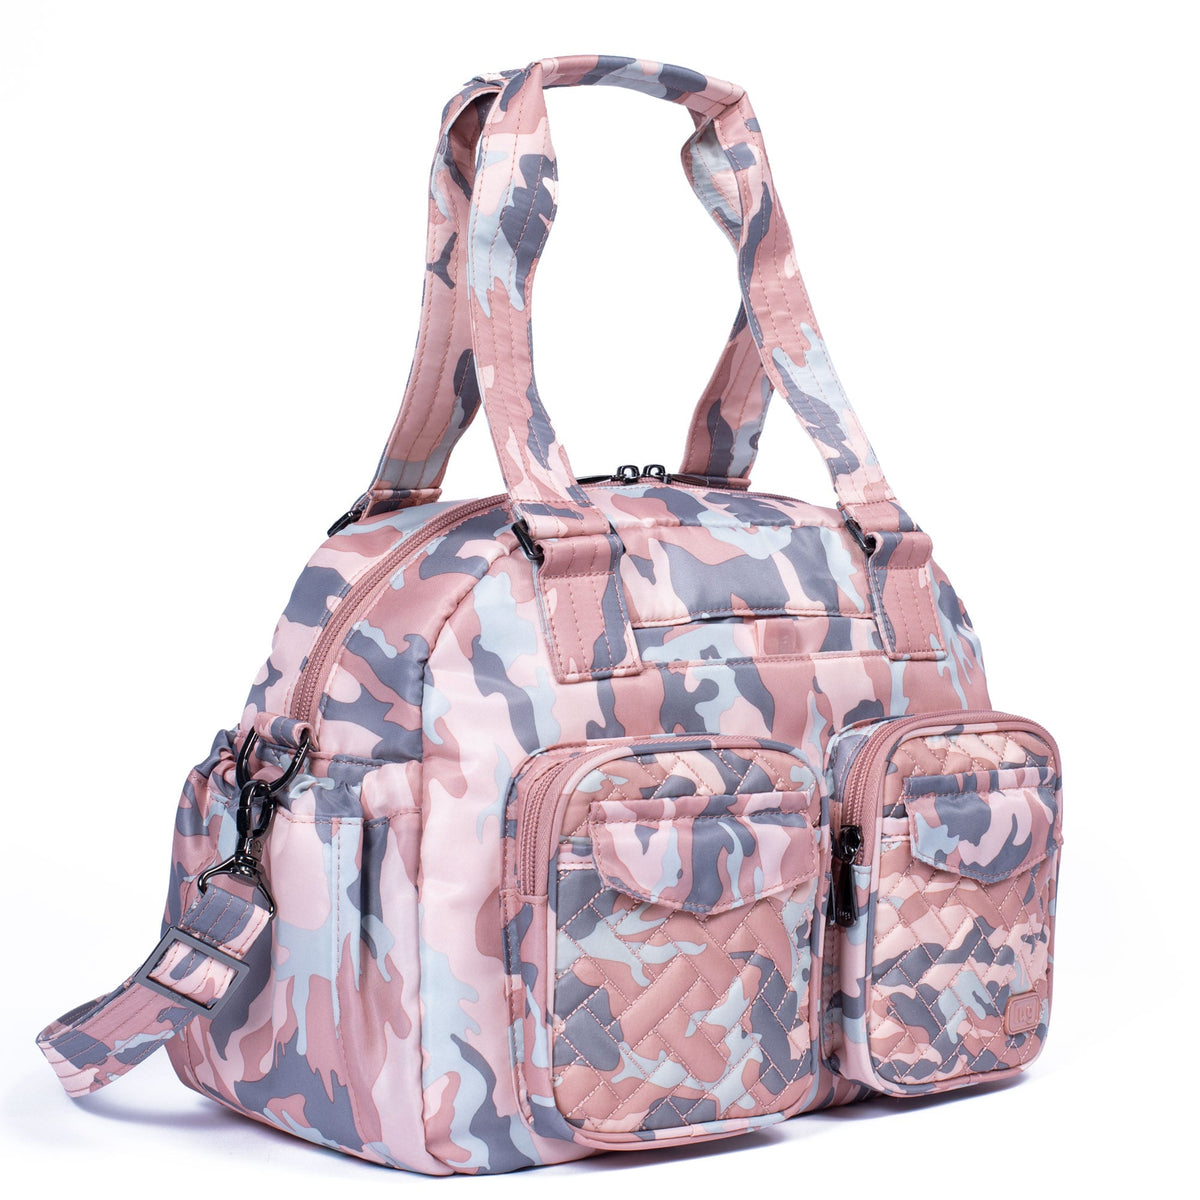 Jumper Carry-All Tote